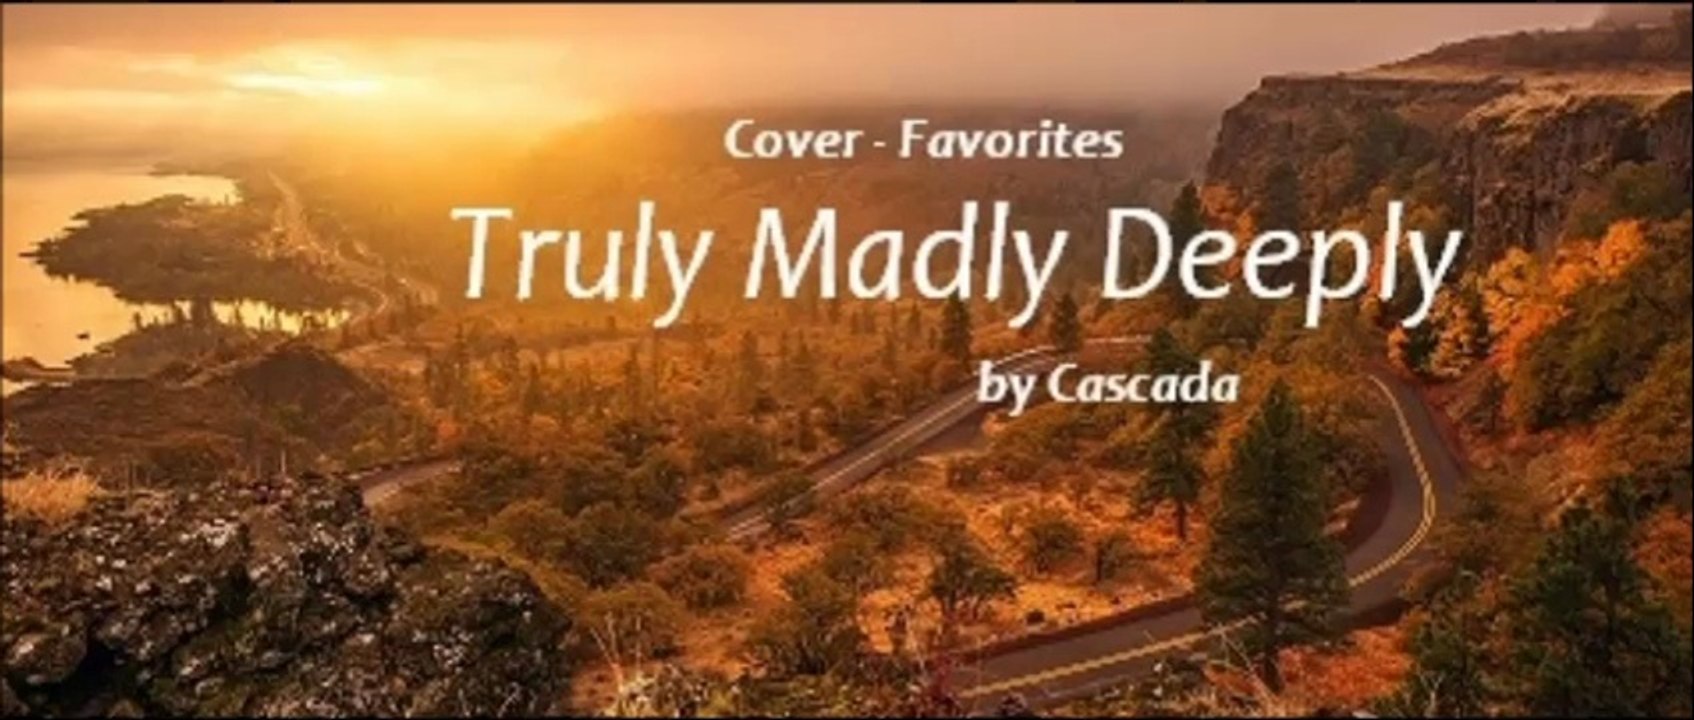 Truly Madly Deeply by Cascada (Cover - Favorites)